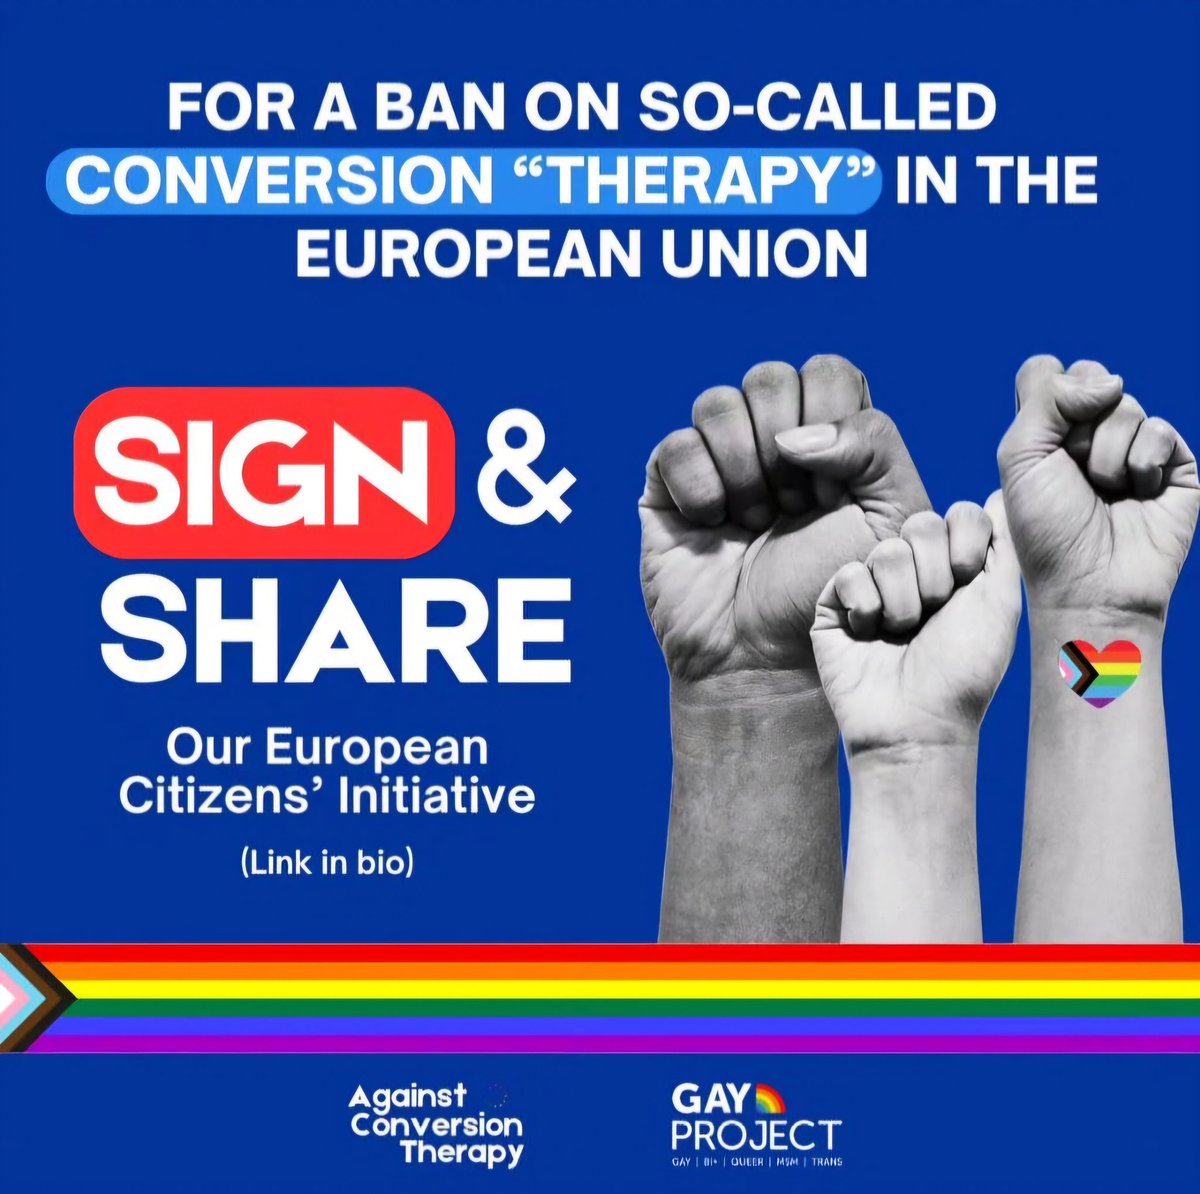 For this year's IDAHOBIT 🏳️‍🌈 under the title “No one left behind: equality, freedom and justice for all”, we ask you to help us. ‼️ SIGN THE ECI to ban conversion practices in the European Union ✍🏻 🇪🇺 eci.ec.europa.eu/043/public/#/s…